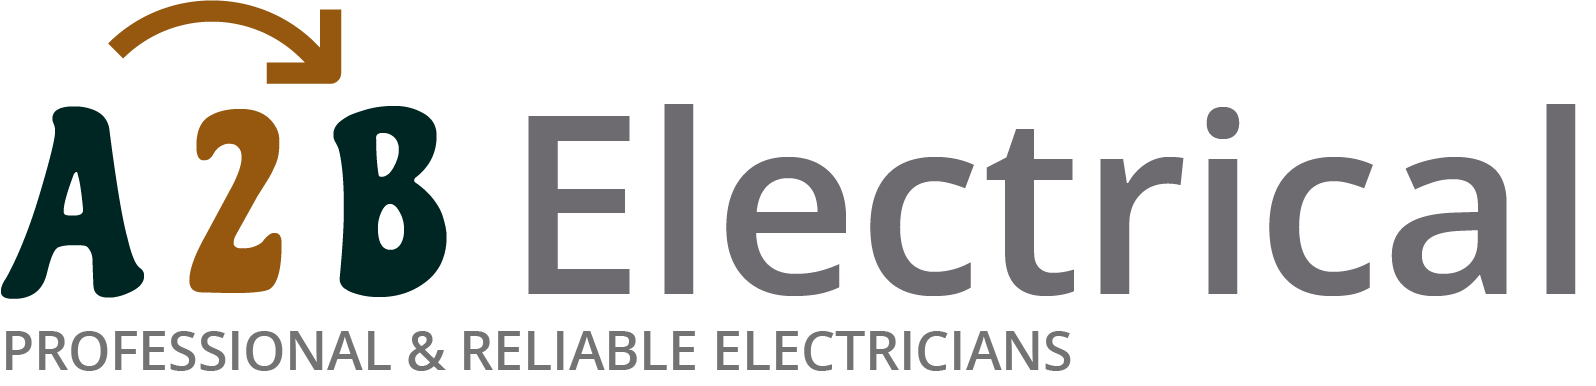 If you have electrical wiring problems in Hackney, we can provide an electrician to have a look for you. 